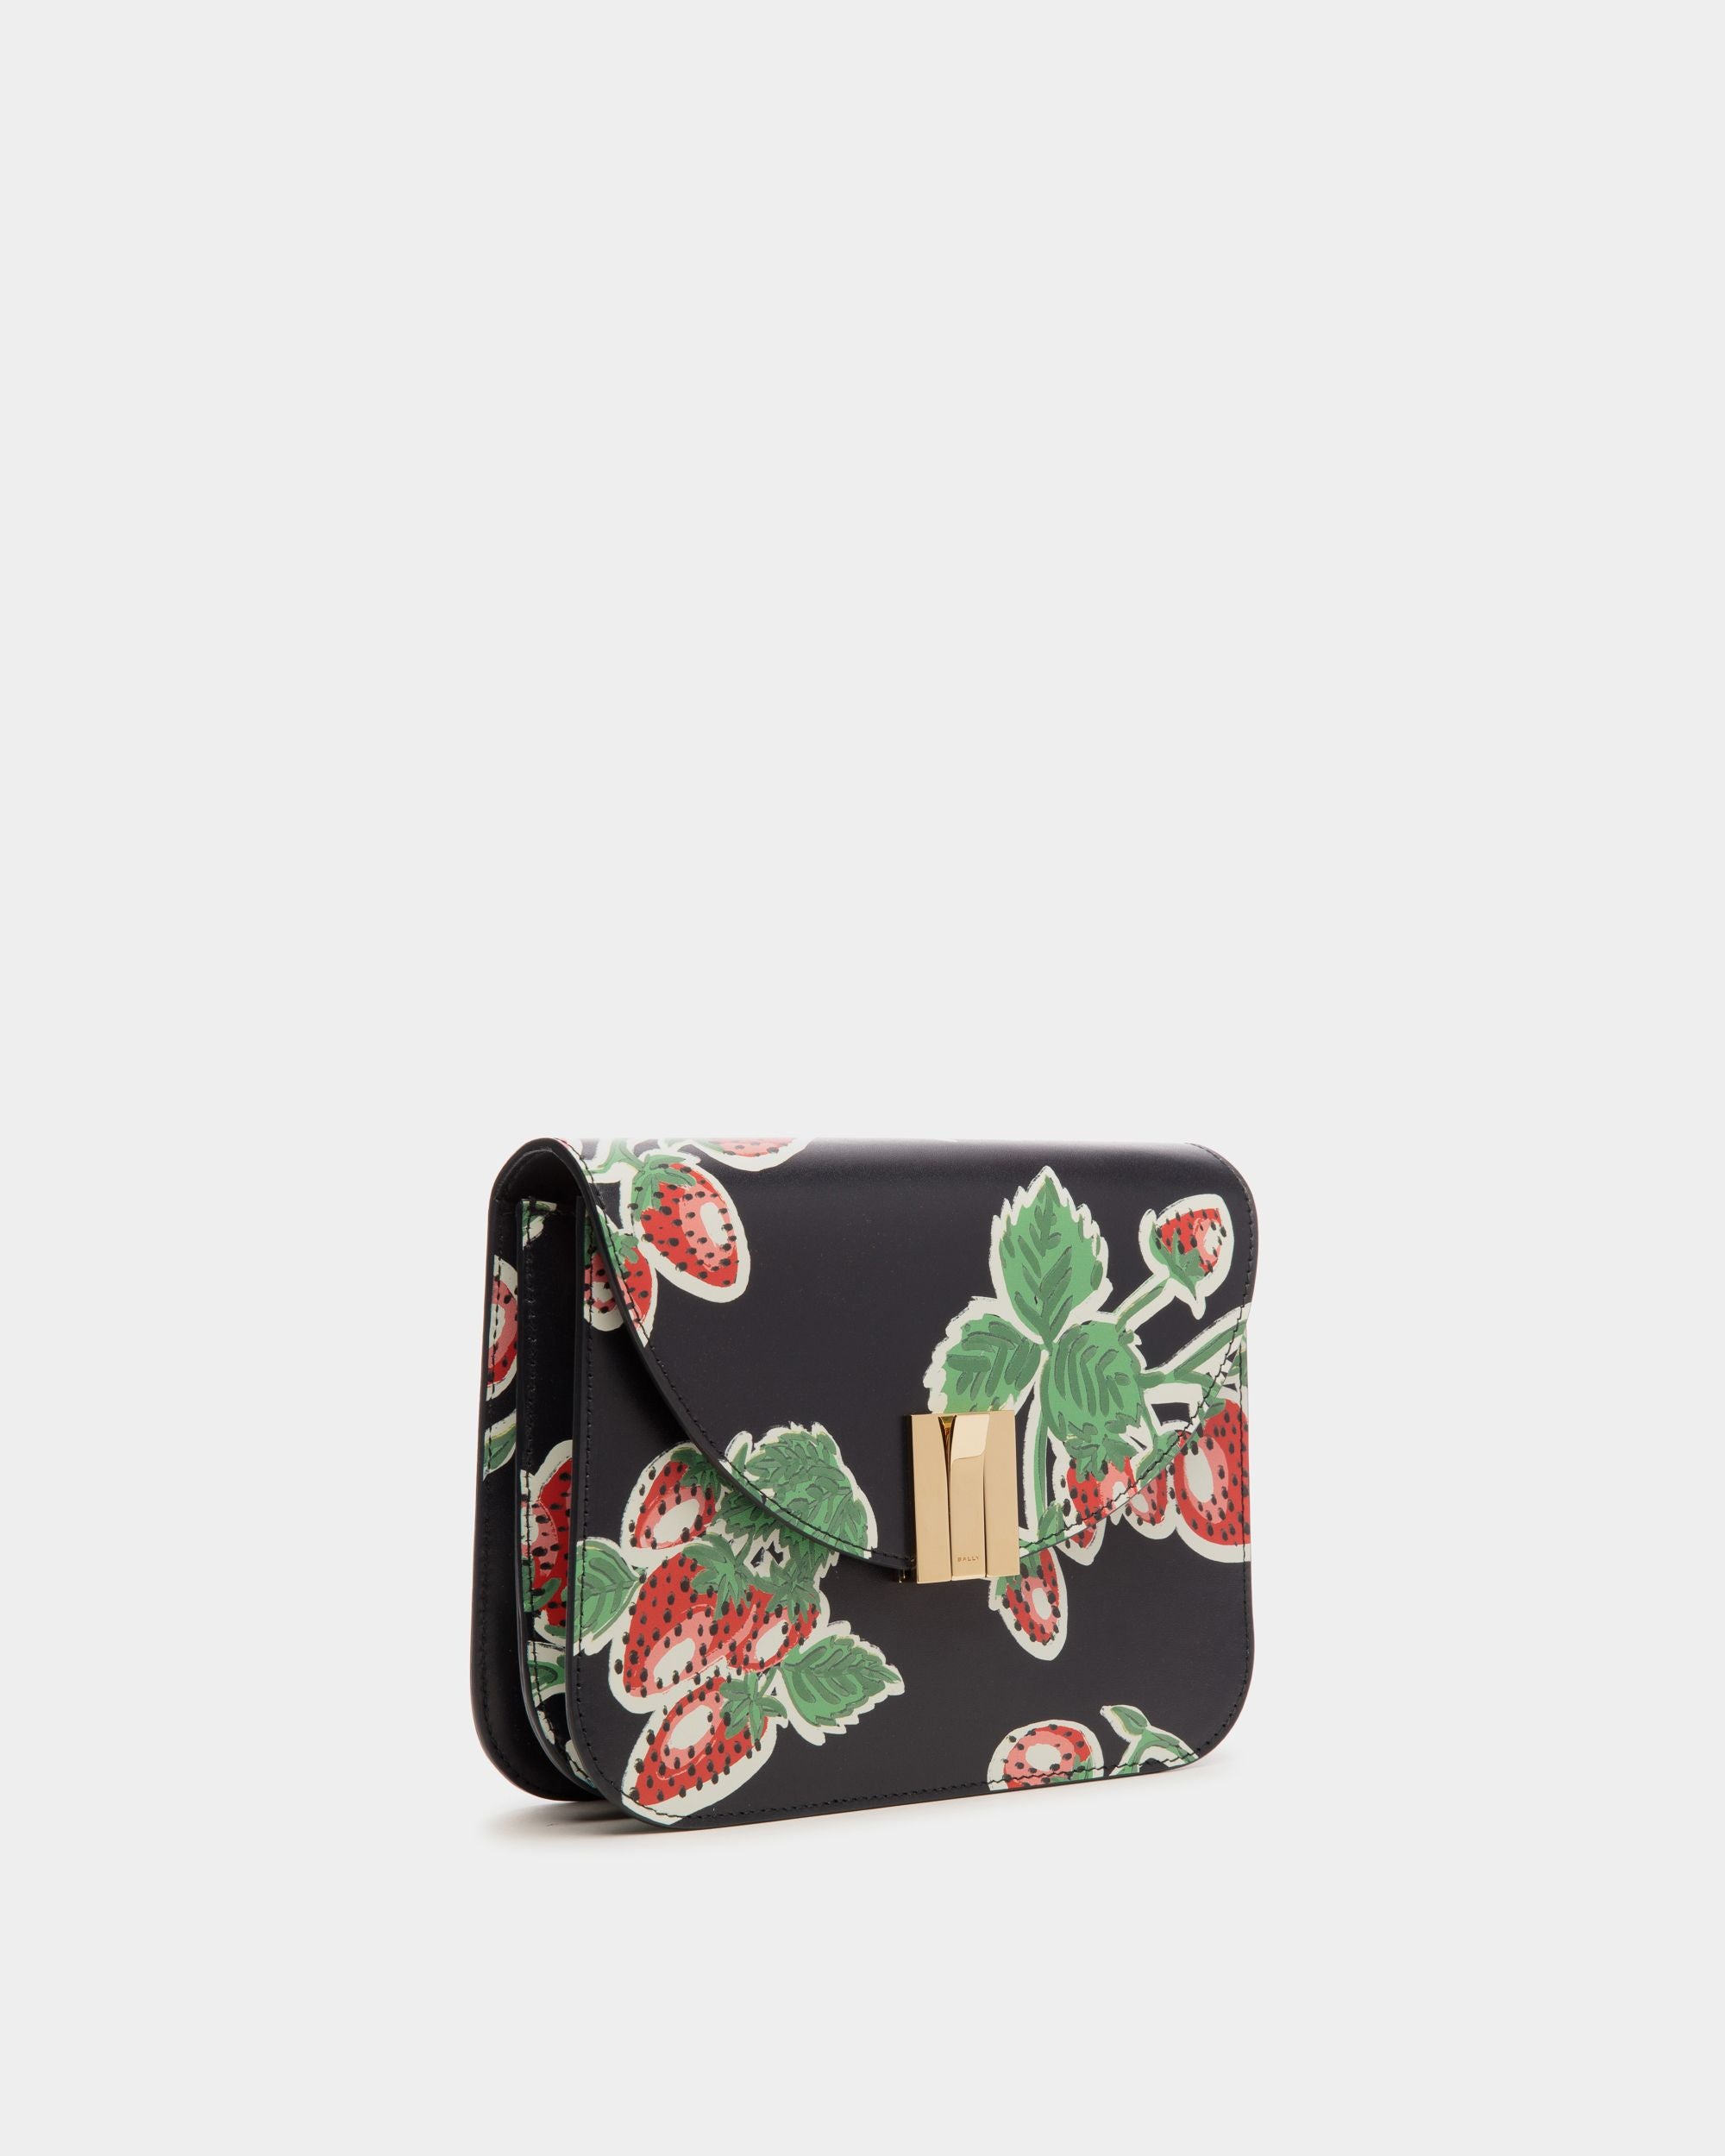 Ollam | Women's Crossbody Bag in Strawberry Print Leather | Bally | Still Life 3/4 Front